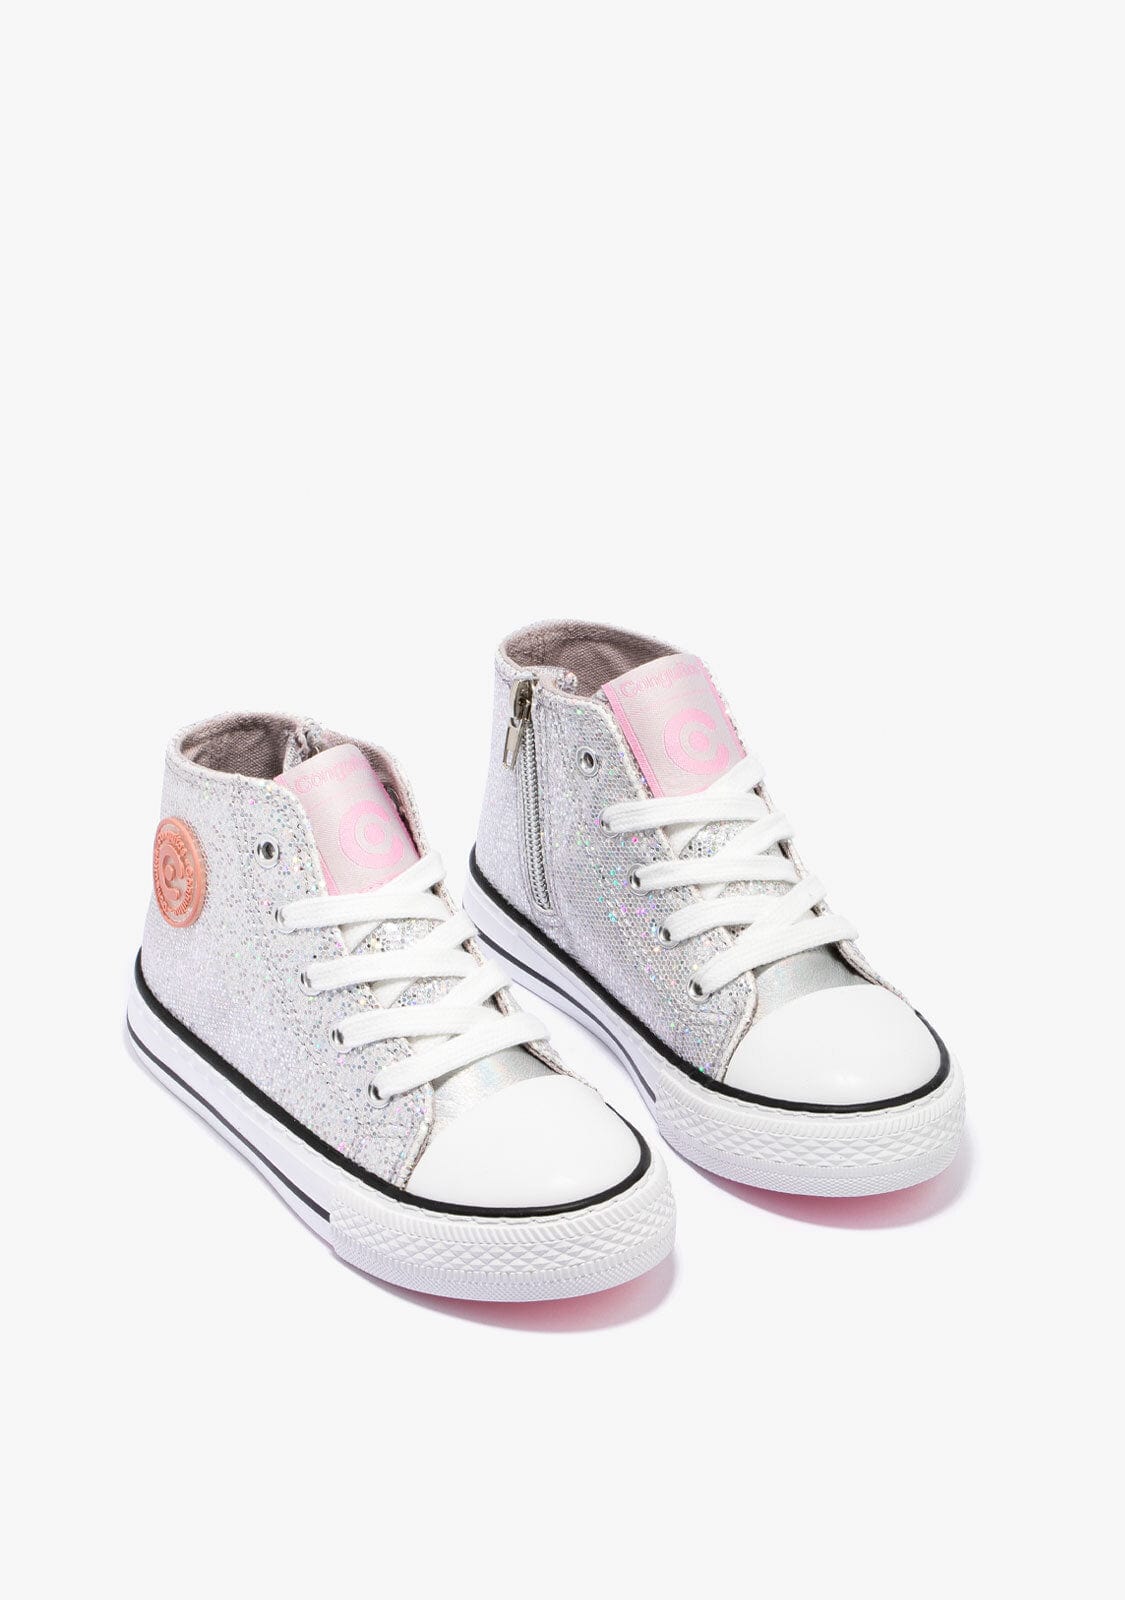 CONGUITOS Shoes Girl's Silver Glitter Hi-Top Sneakers